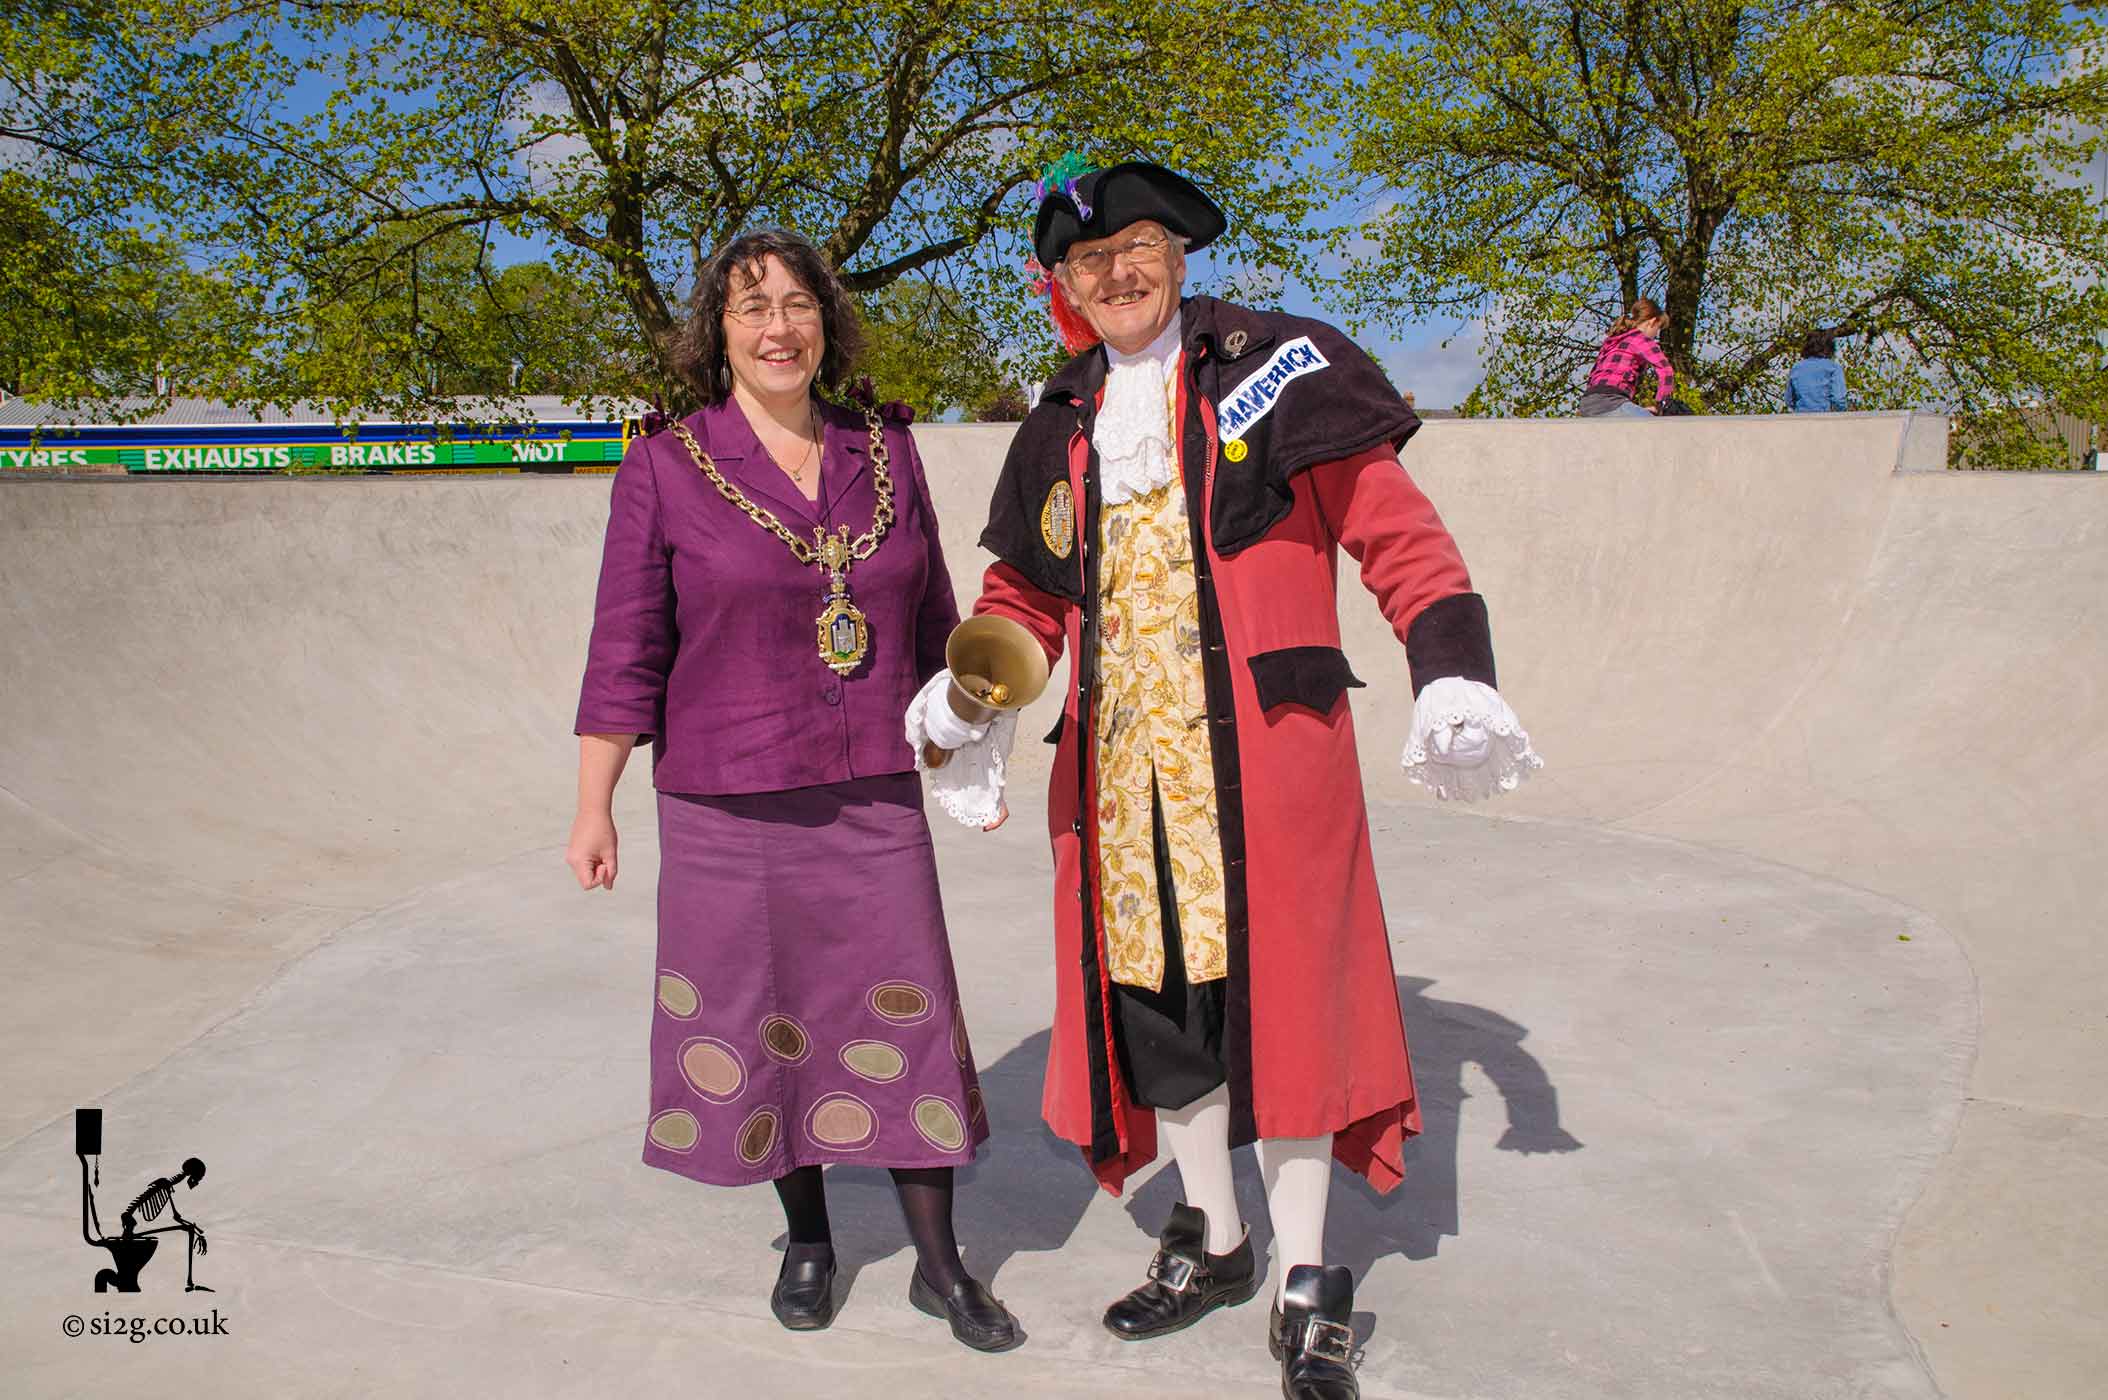 Mayor and Town Crier - The Mayor of Dorchester and the Tower Crier at the official opening of Dorchester Skatepark.